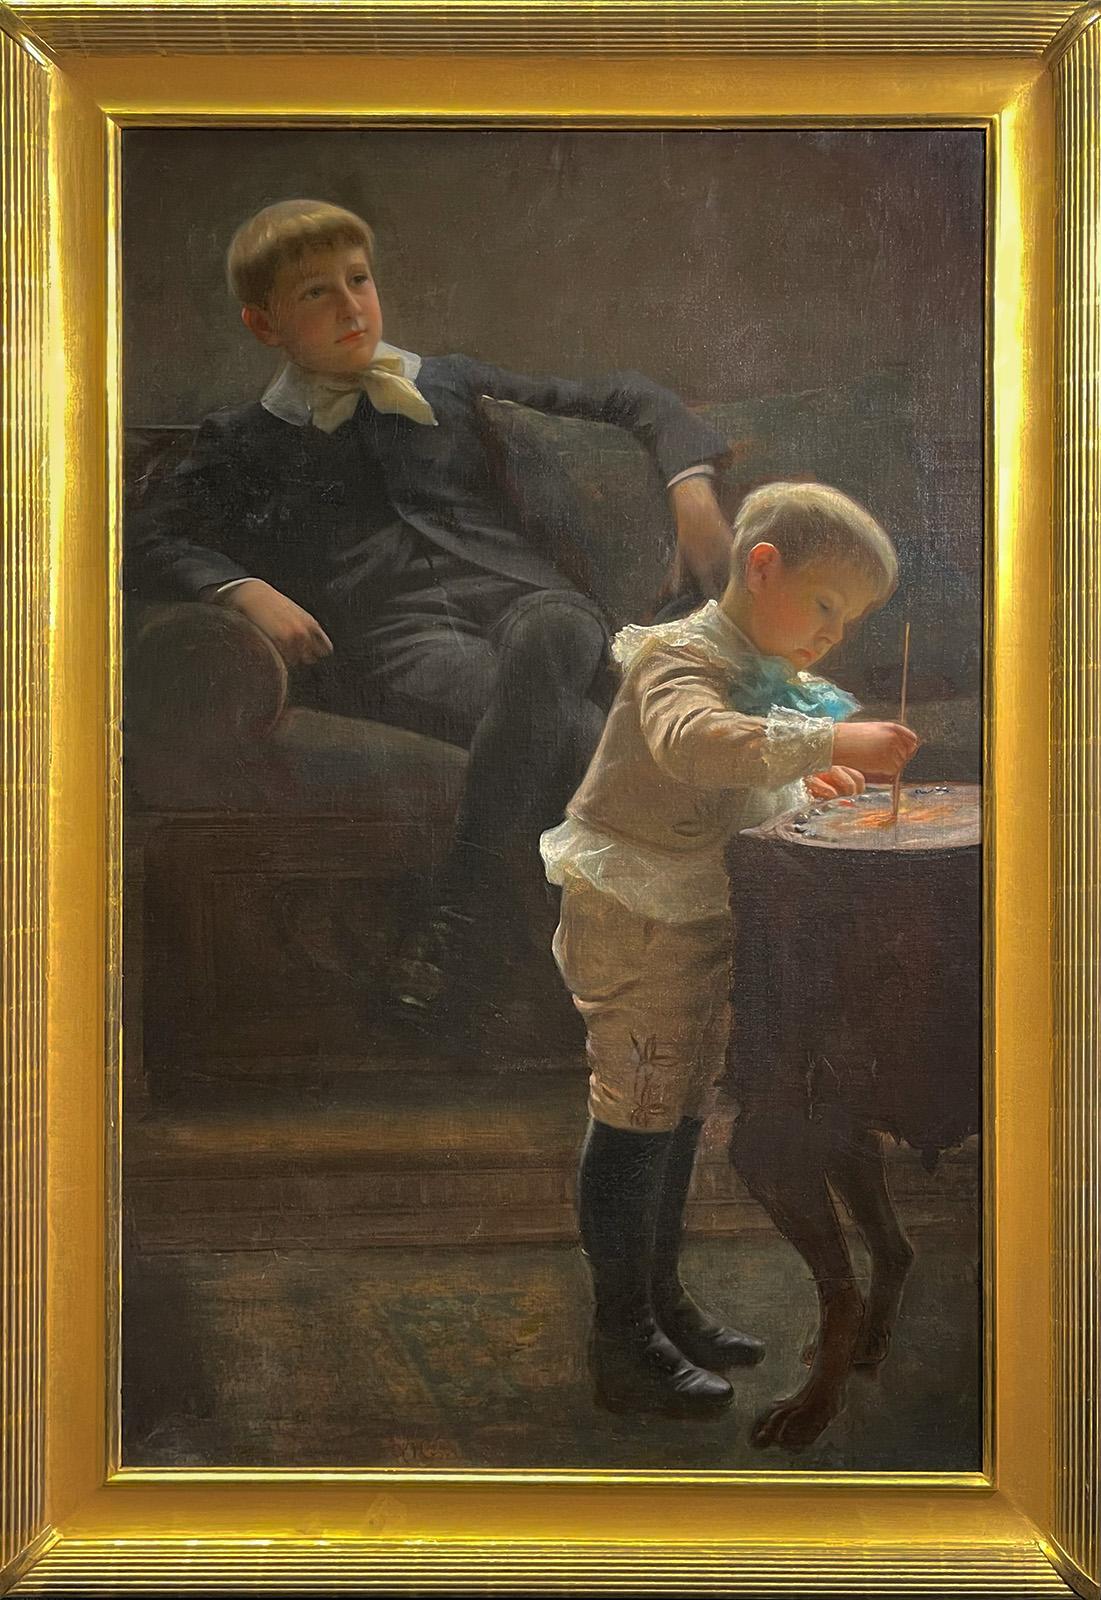 "Self Portrait Of The Artist As A Young Boy" by Michele Gordigiani